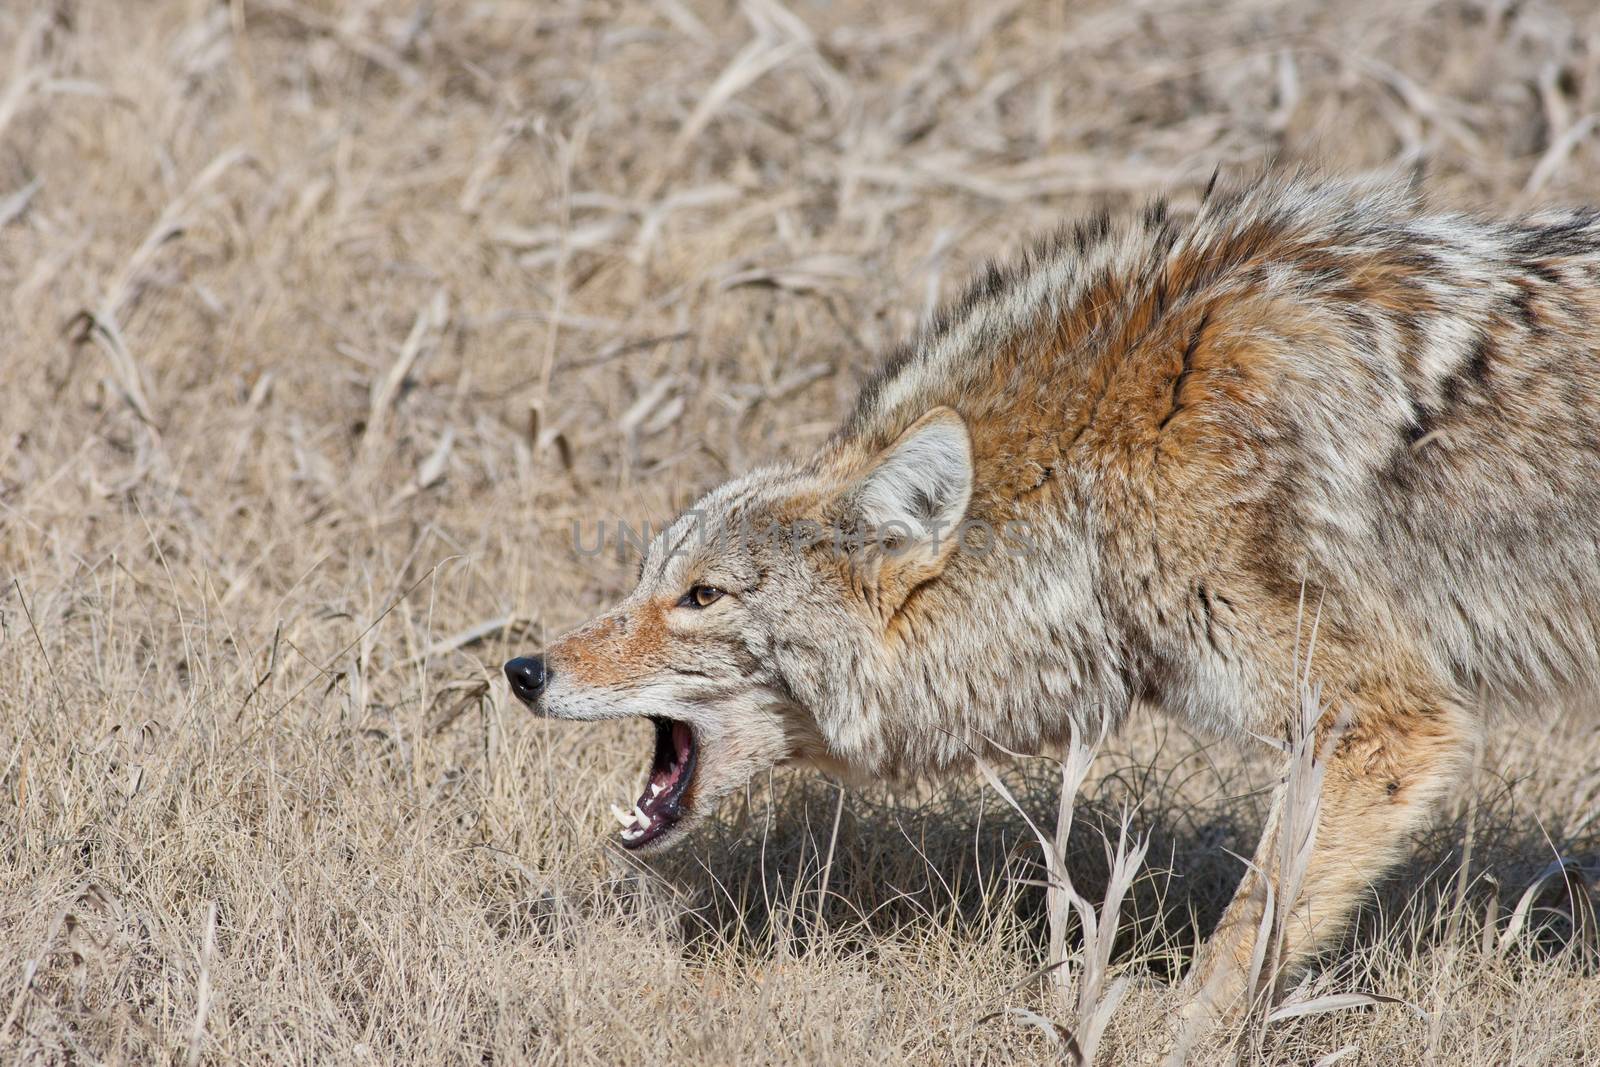 A fierce, snarling coyote with mouth open and hackles up.  Near Radium Hot Springs, British Columbia, Canada.